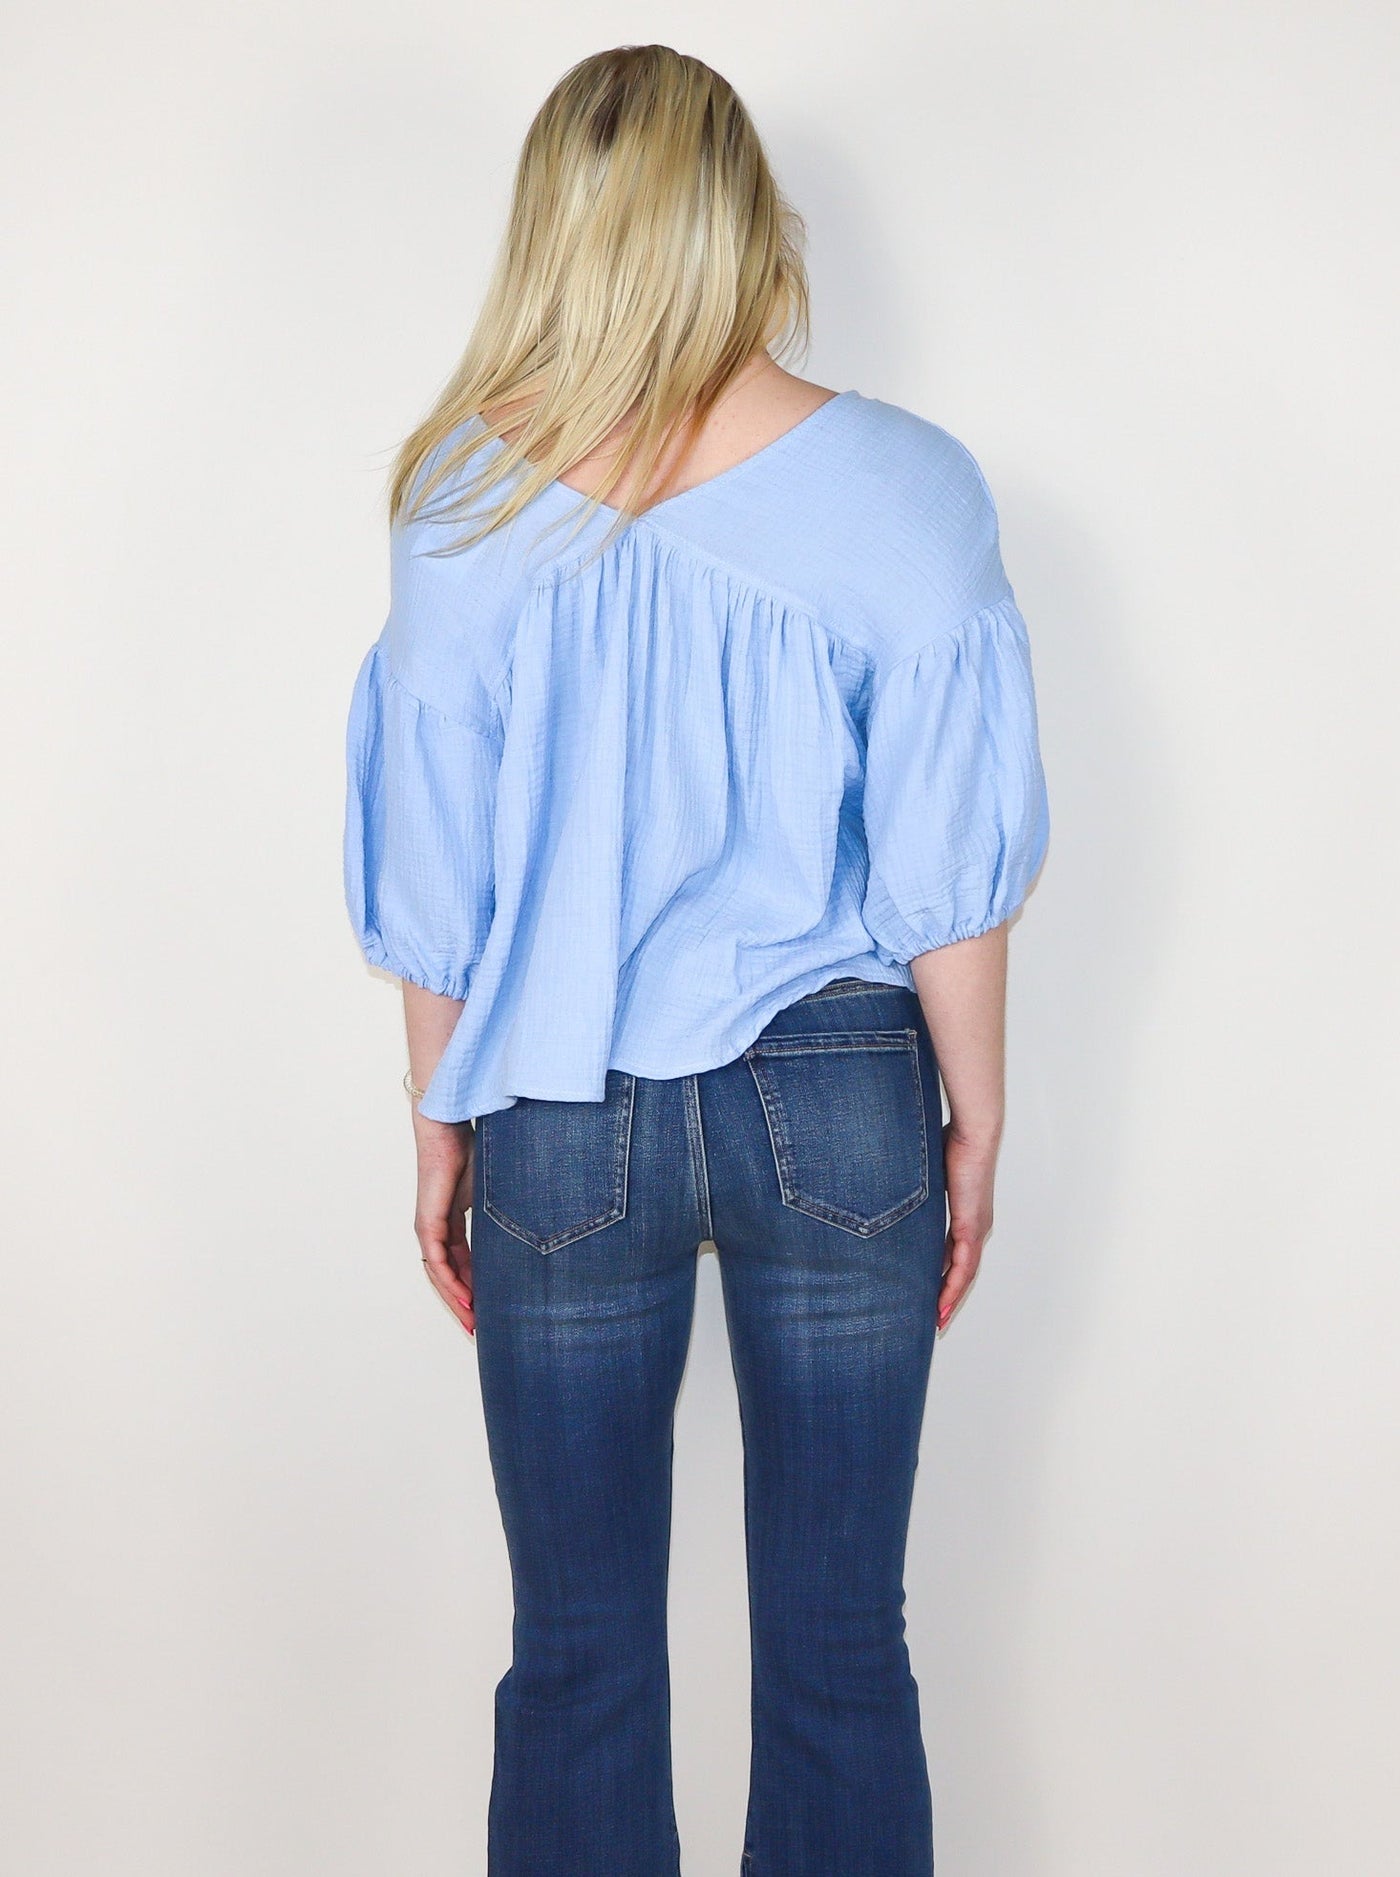 Model is wearing a baby blue flowey V neck half sleeve top. Sleeves are cinched and puffy. Top is paired with blue jeans.